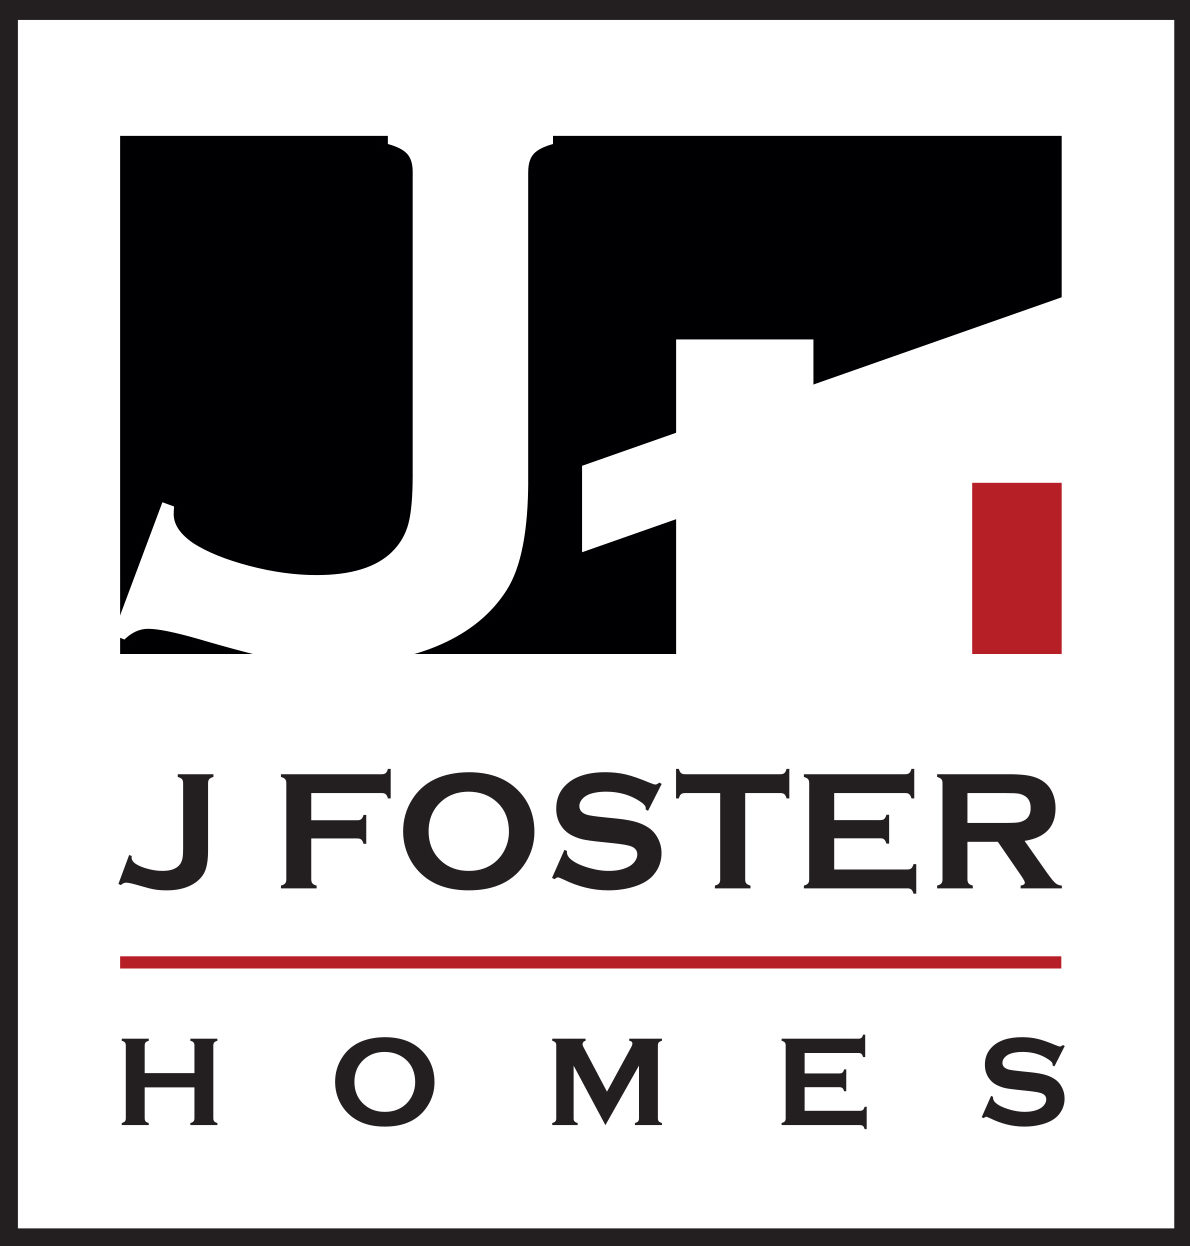 J FOSTER HOMES